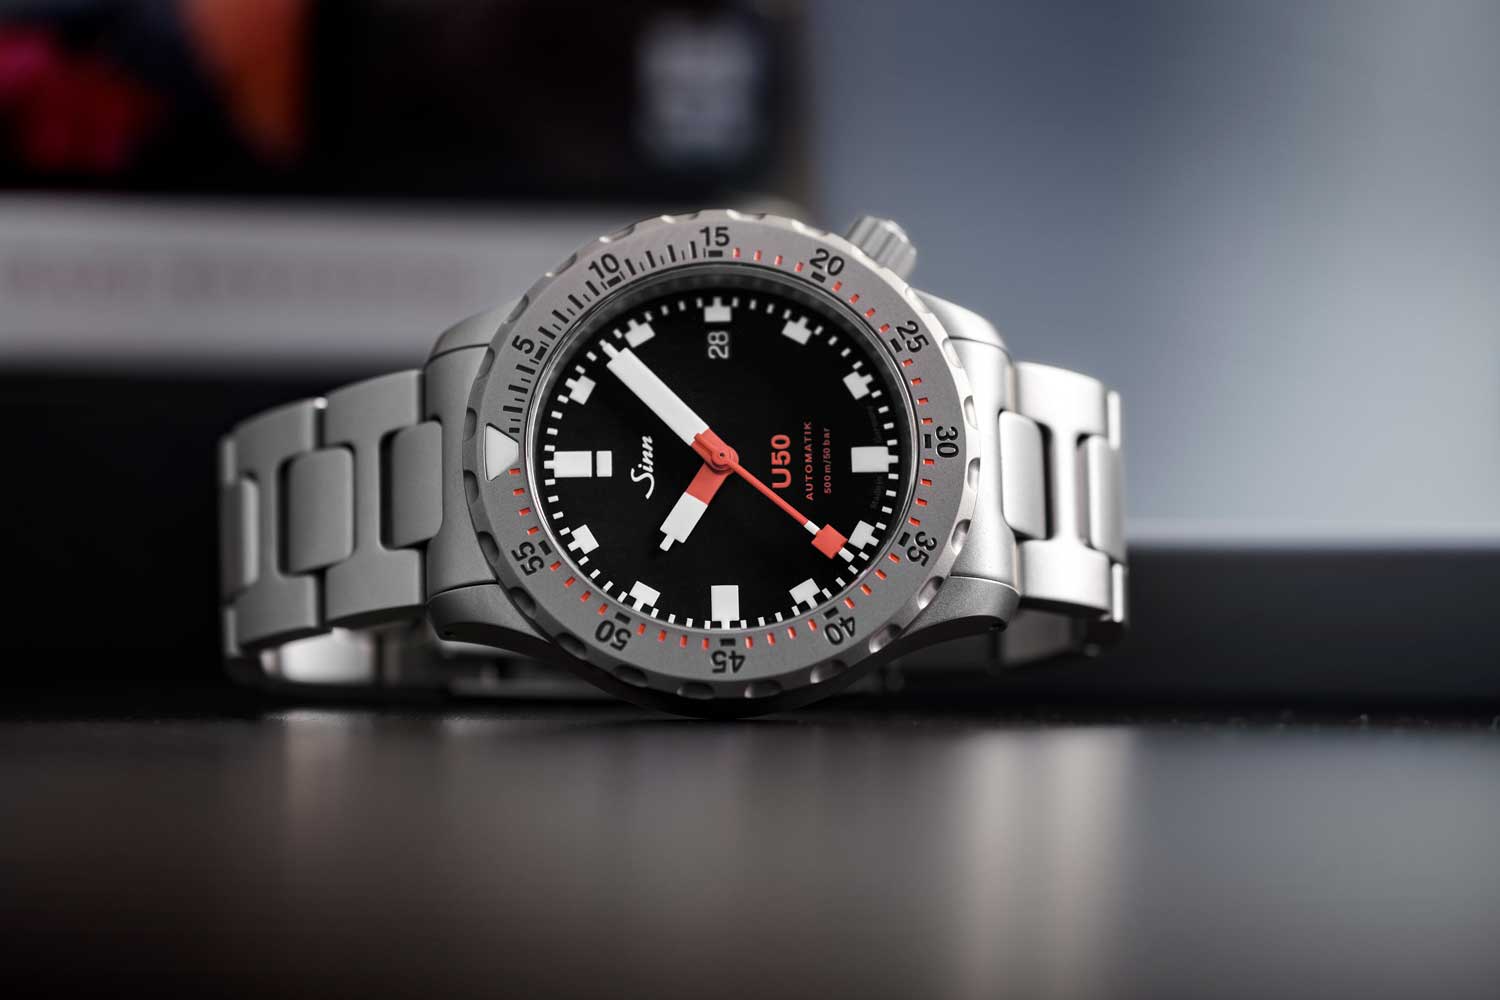 Launched in April of 2020, the SINN U50 had proved itself a shoo-in hit for tool watch lovers at 41mm (©Revolution)